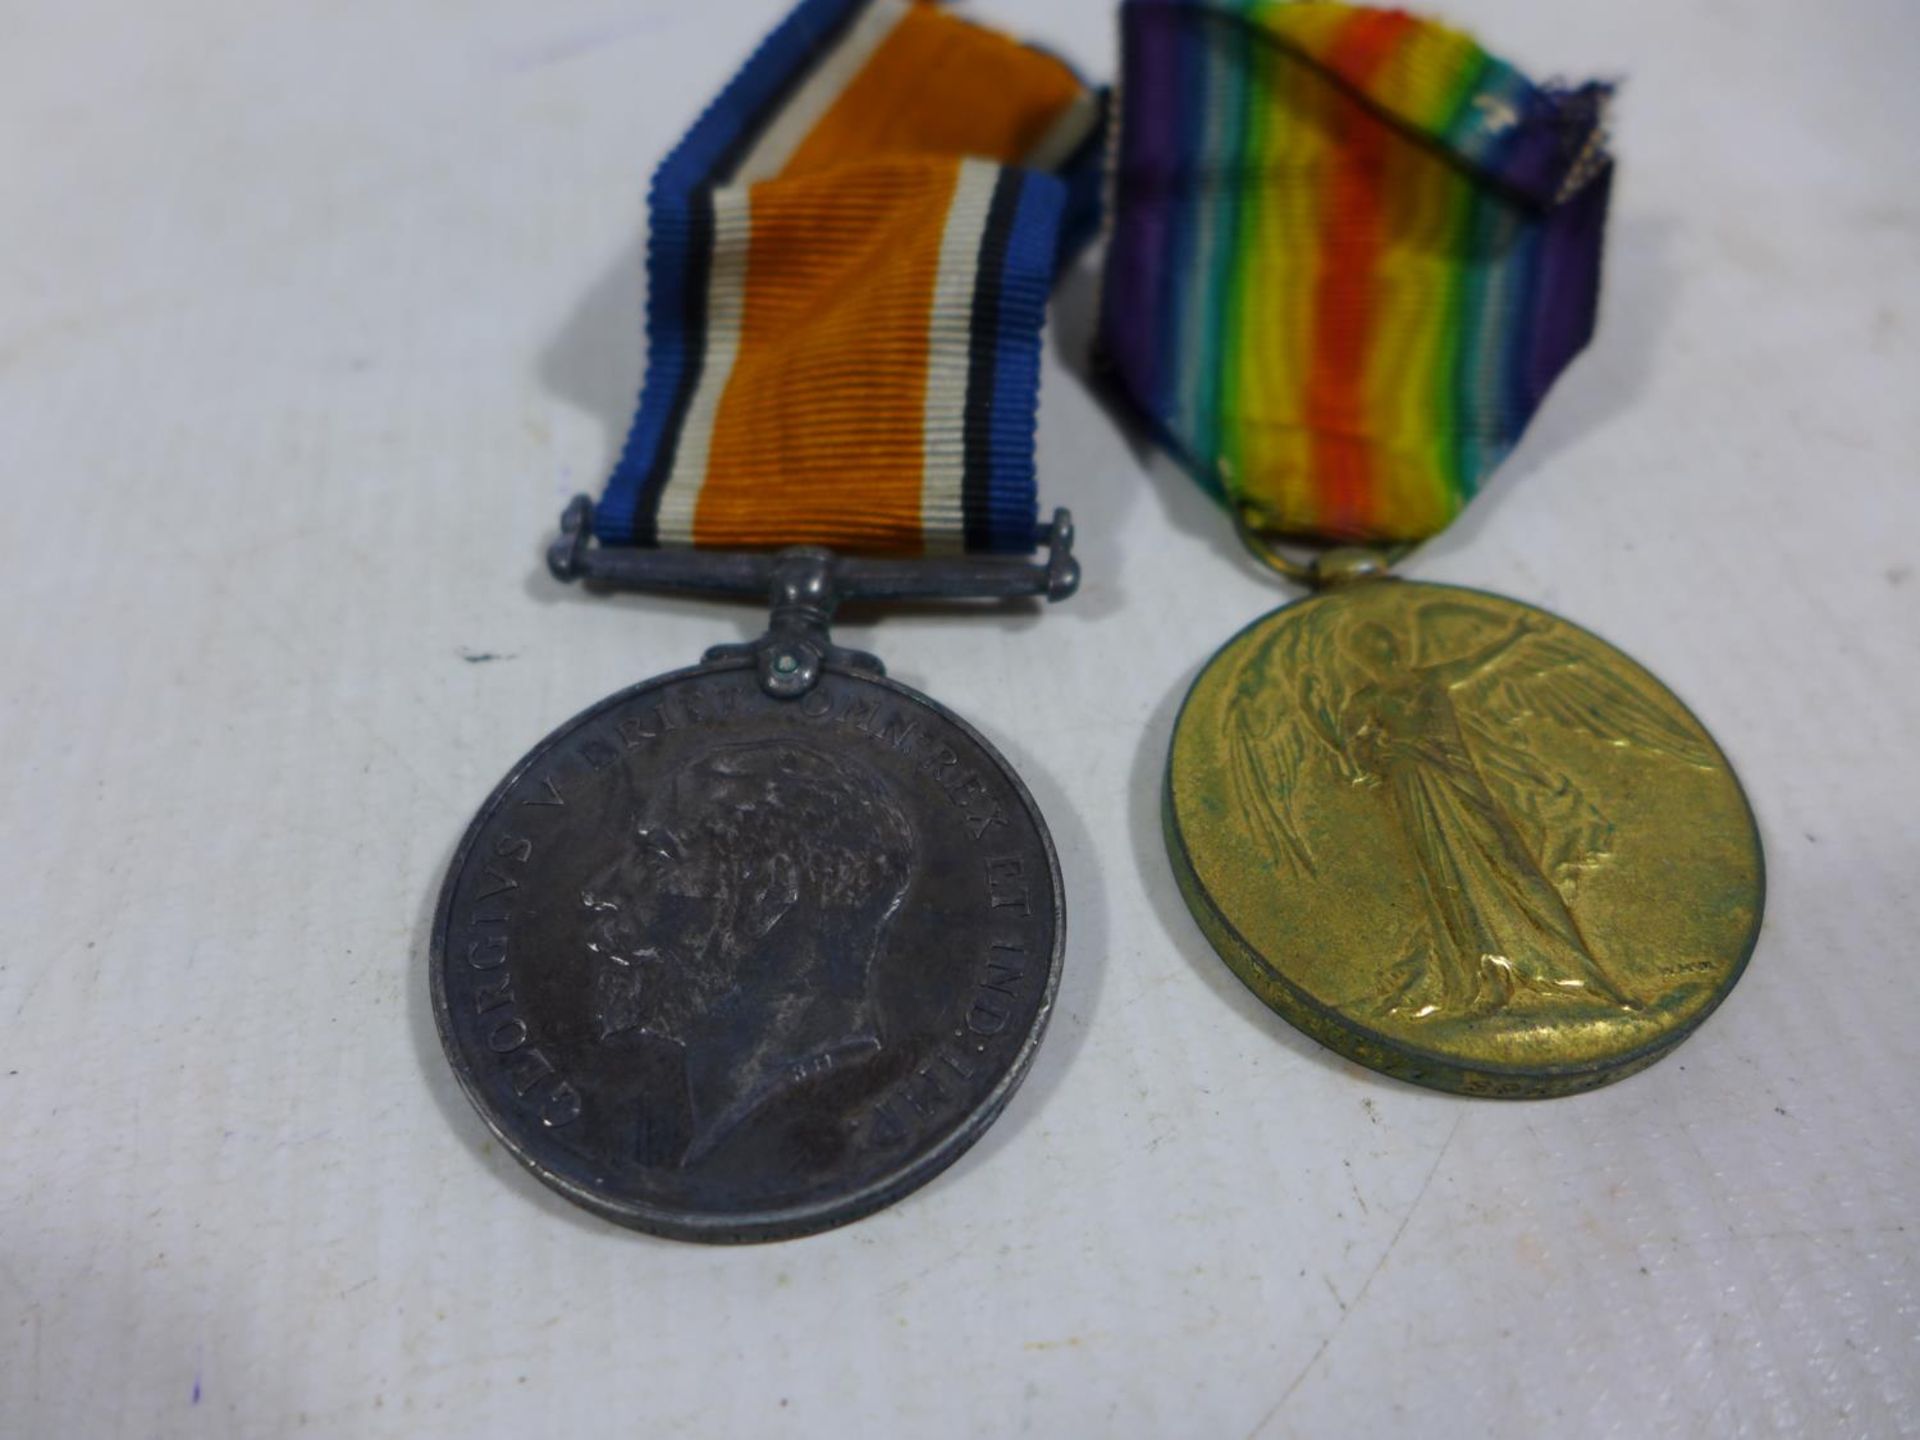 A WORLD WAR I MEDAL PAIR AWARDED TO 290477 SAPPER J STANTON ROYAL ENGINEERS